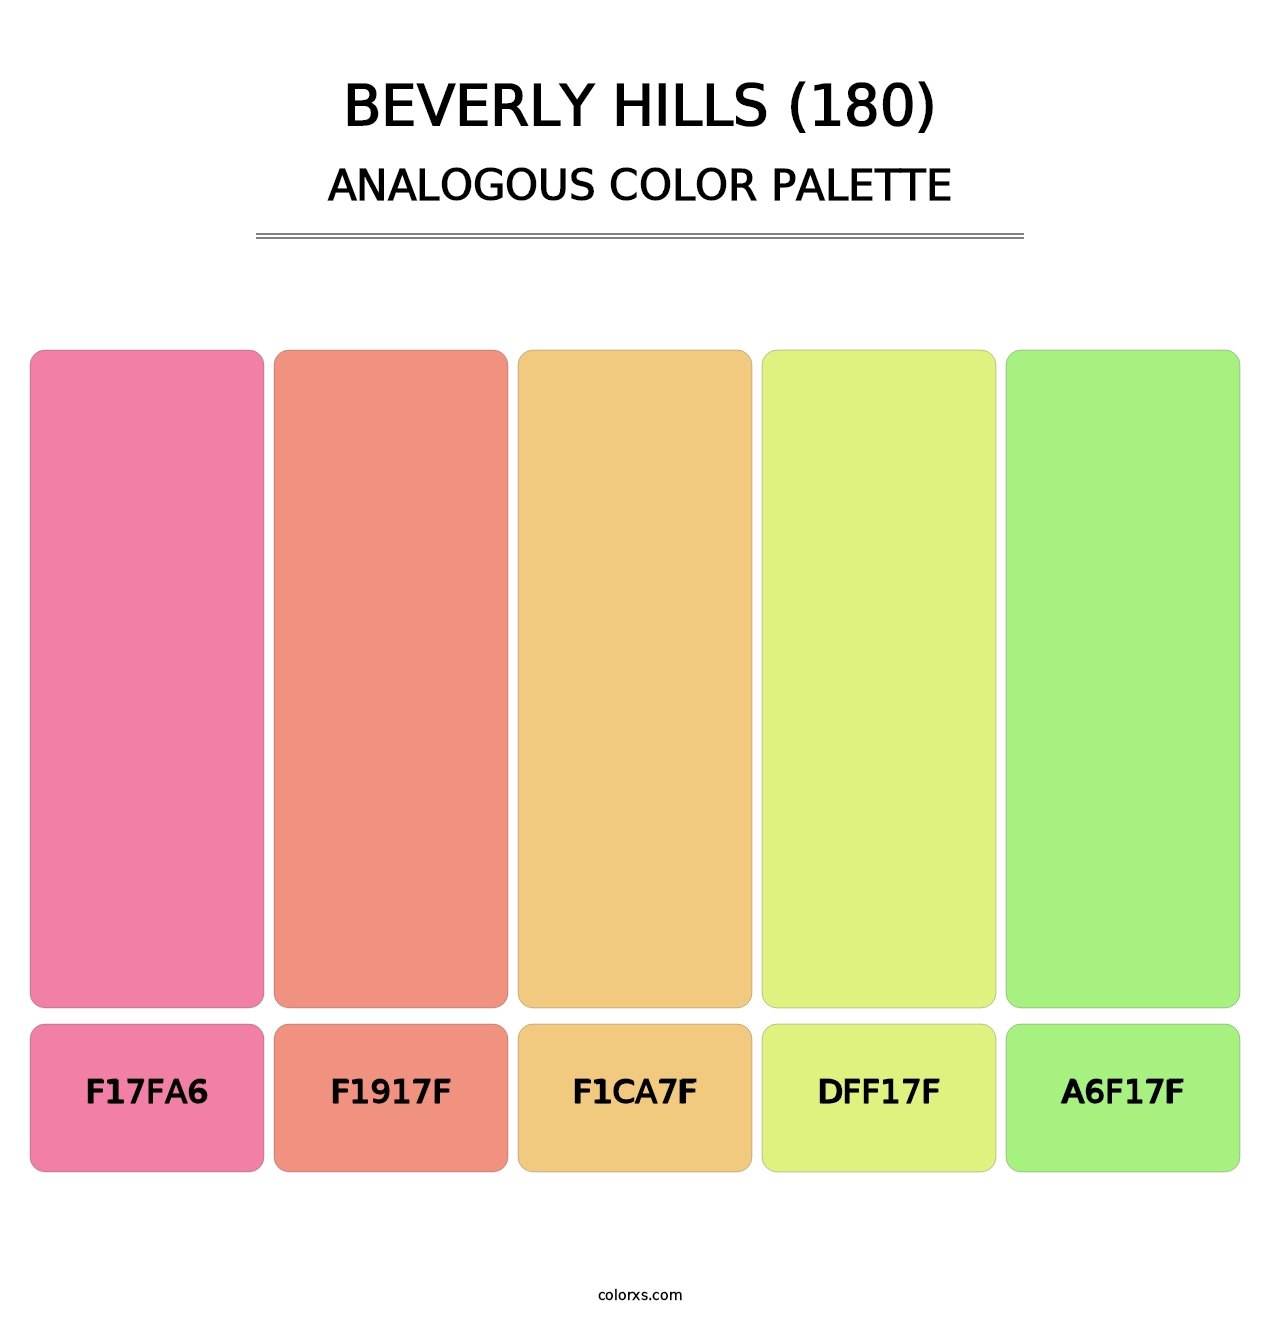 Beverly Hills (180) - Analogous Color Palette